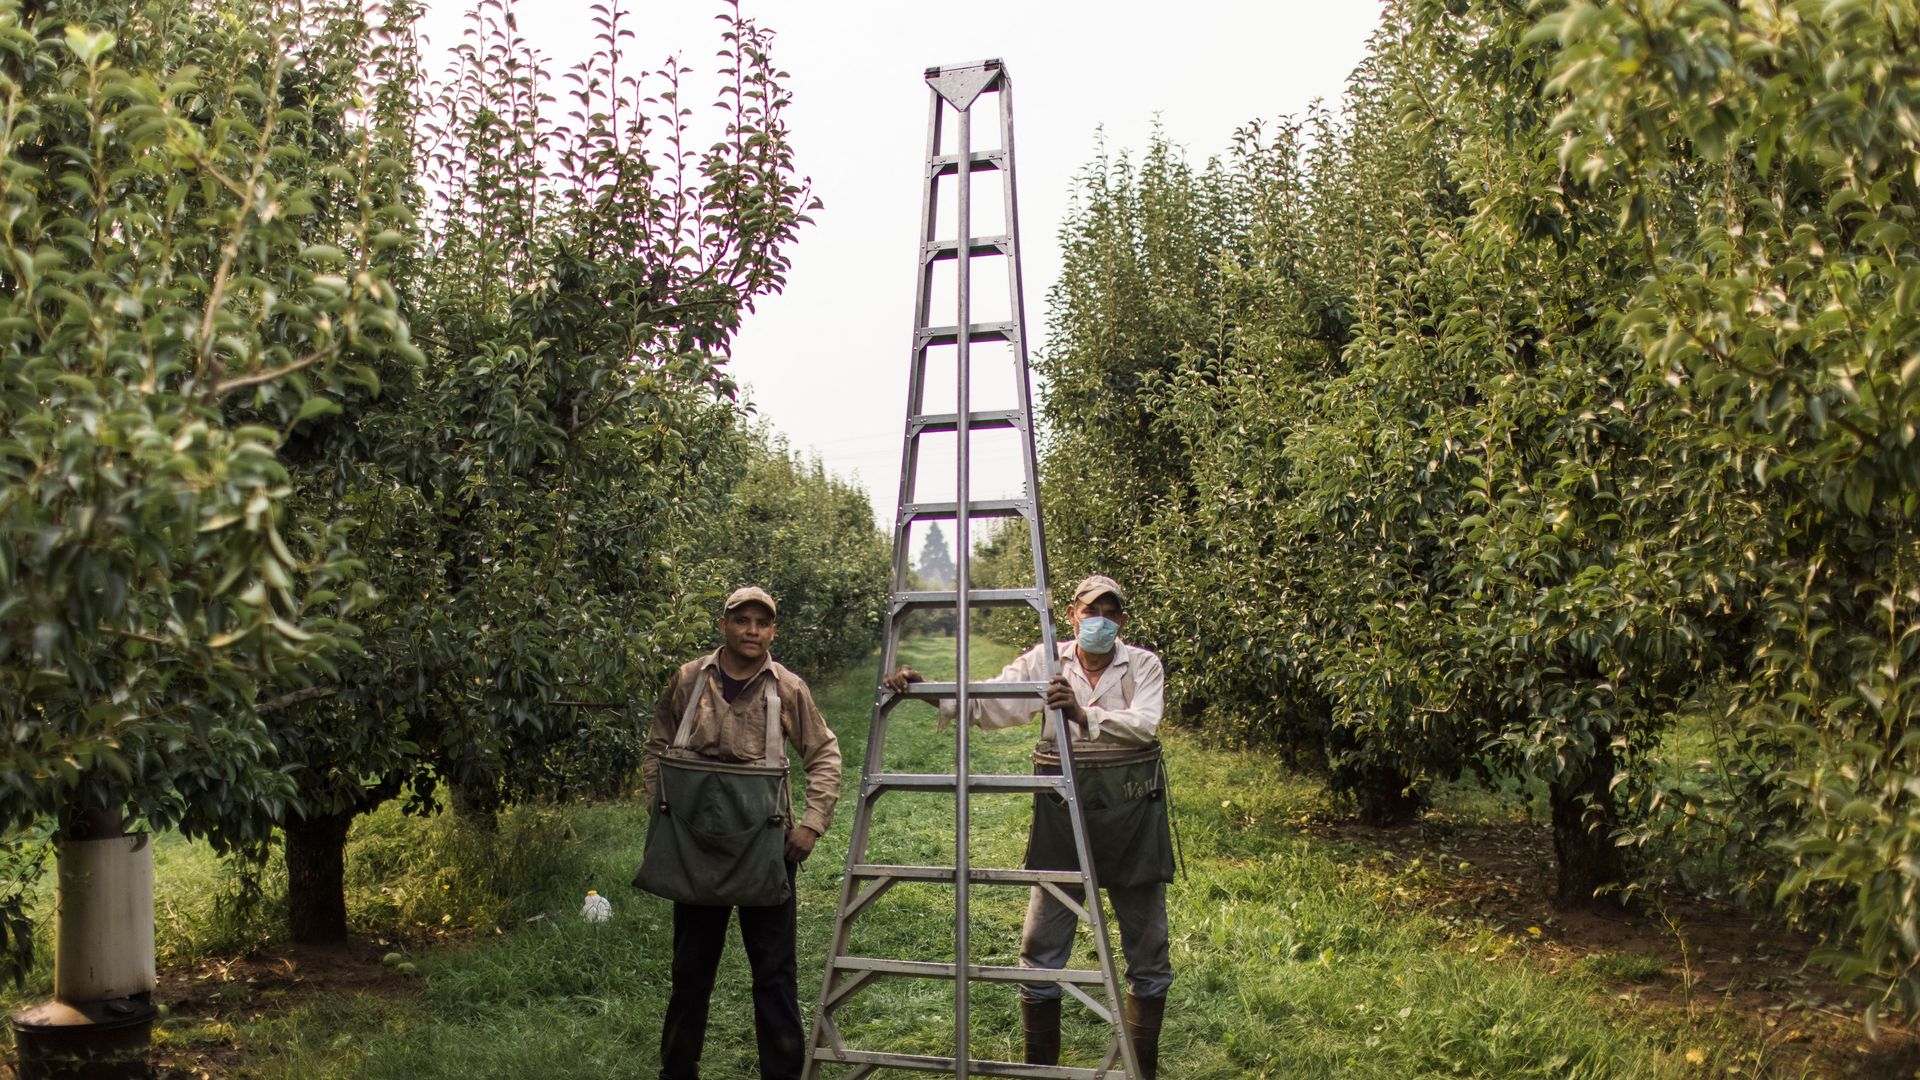 Pear pickers pose during a heat wave in the Pacific Northwest.